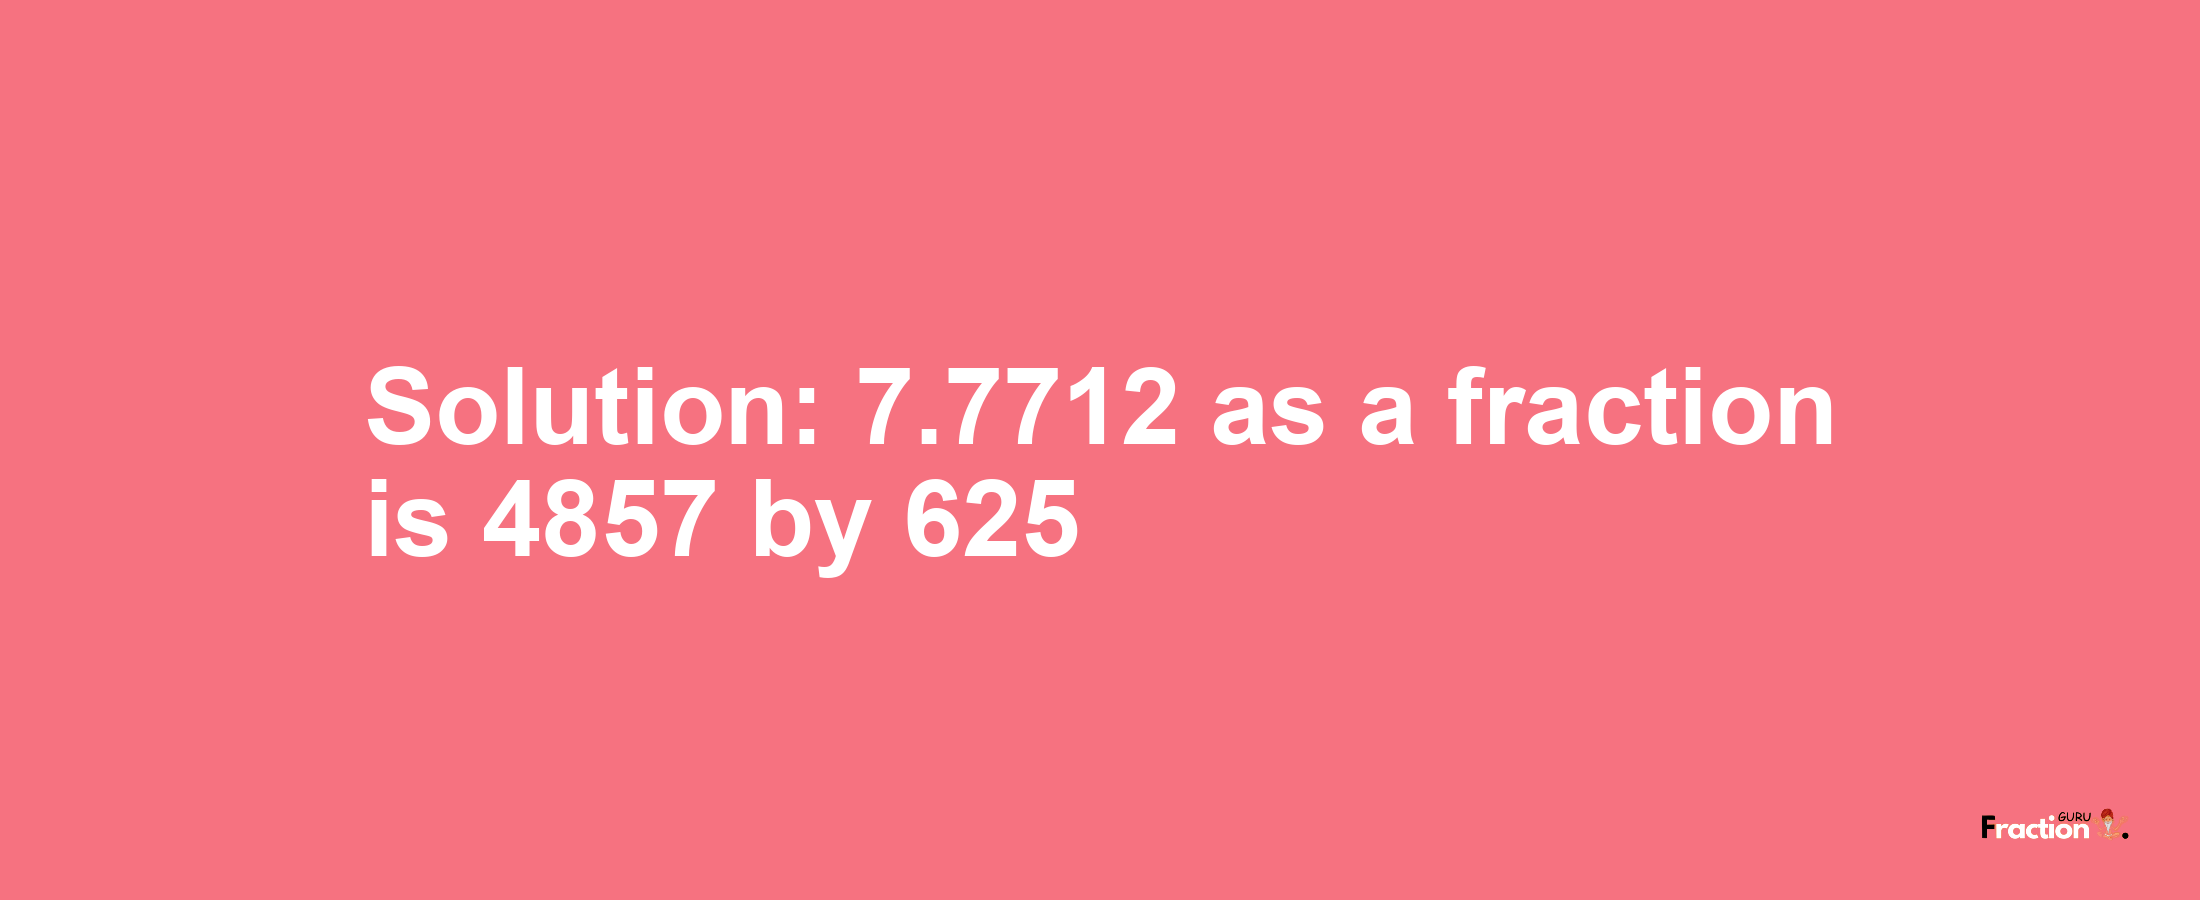 Solution:7.7712 as a fraction is 4857/625